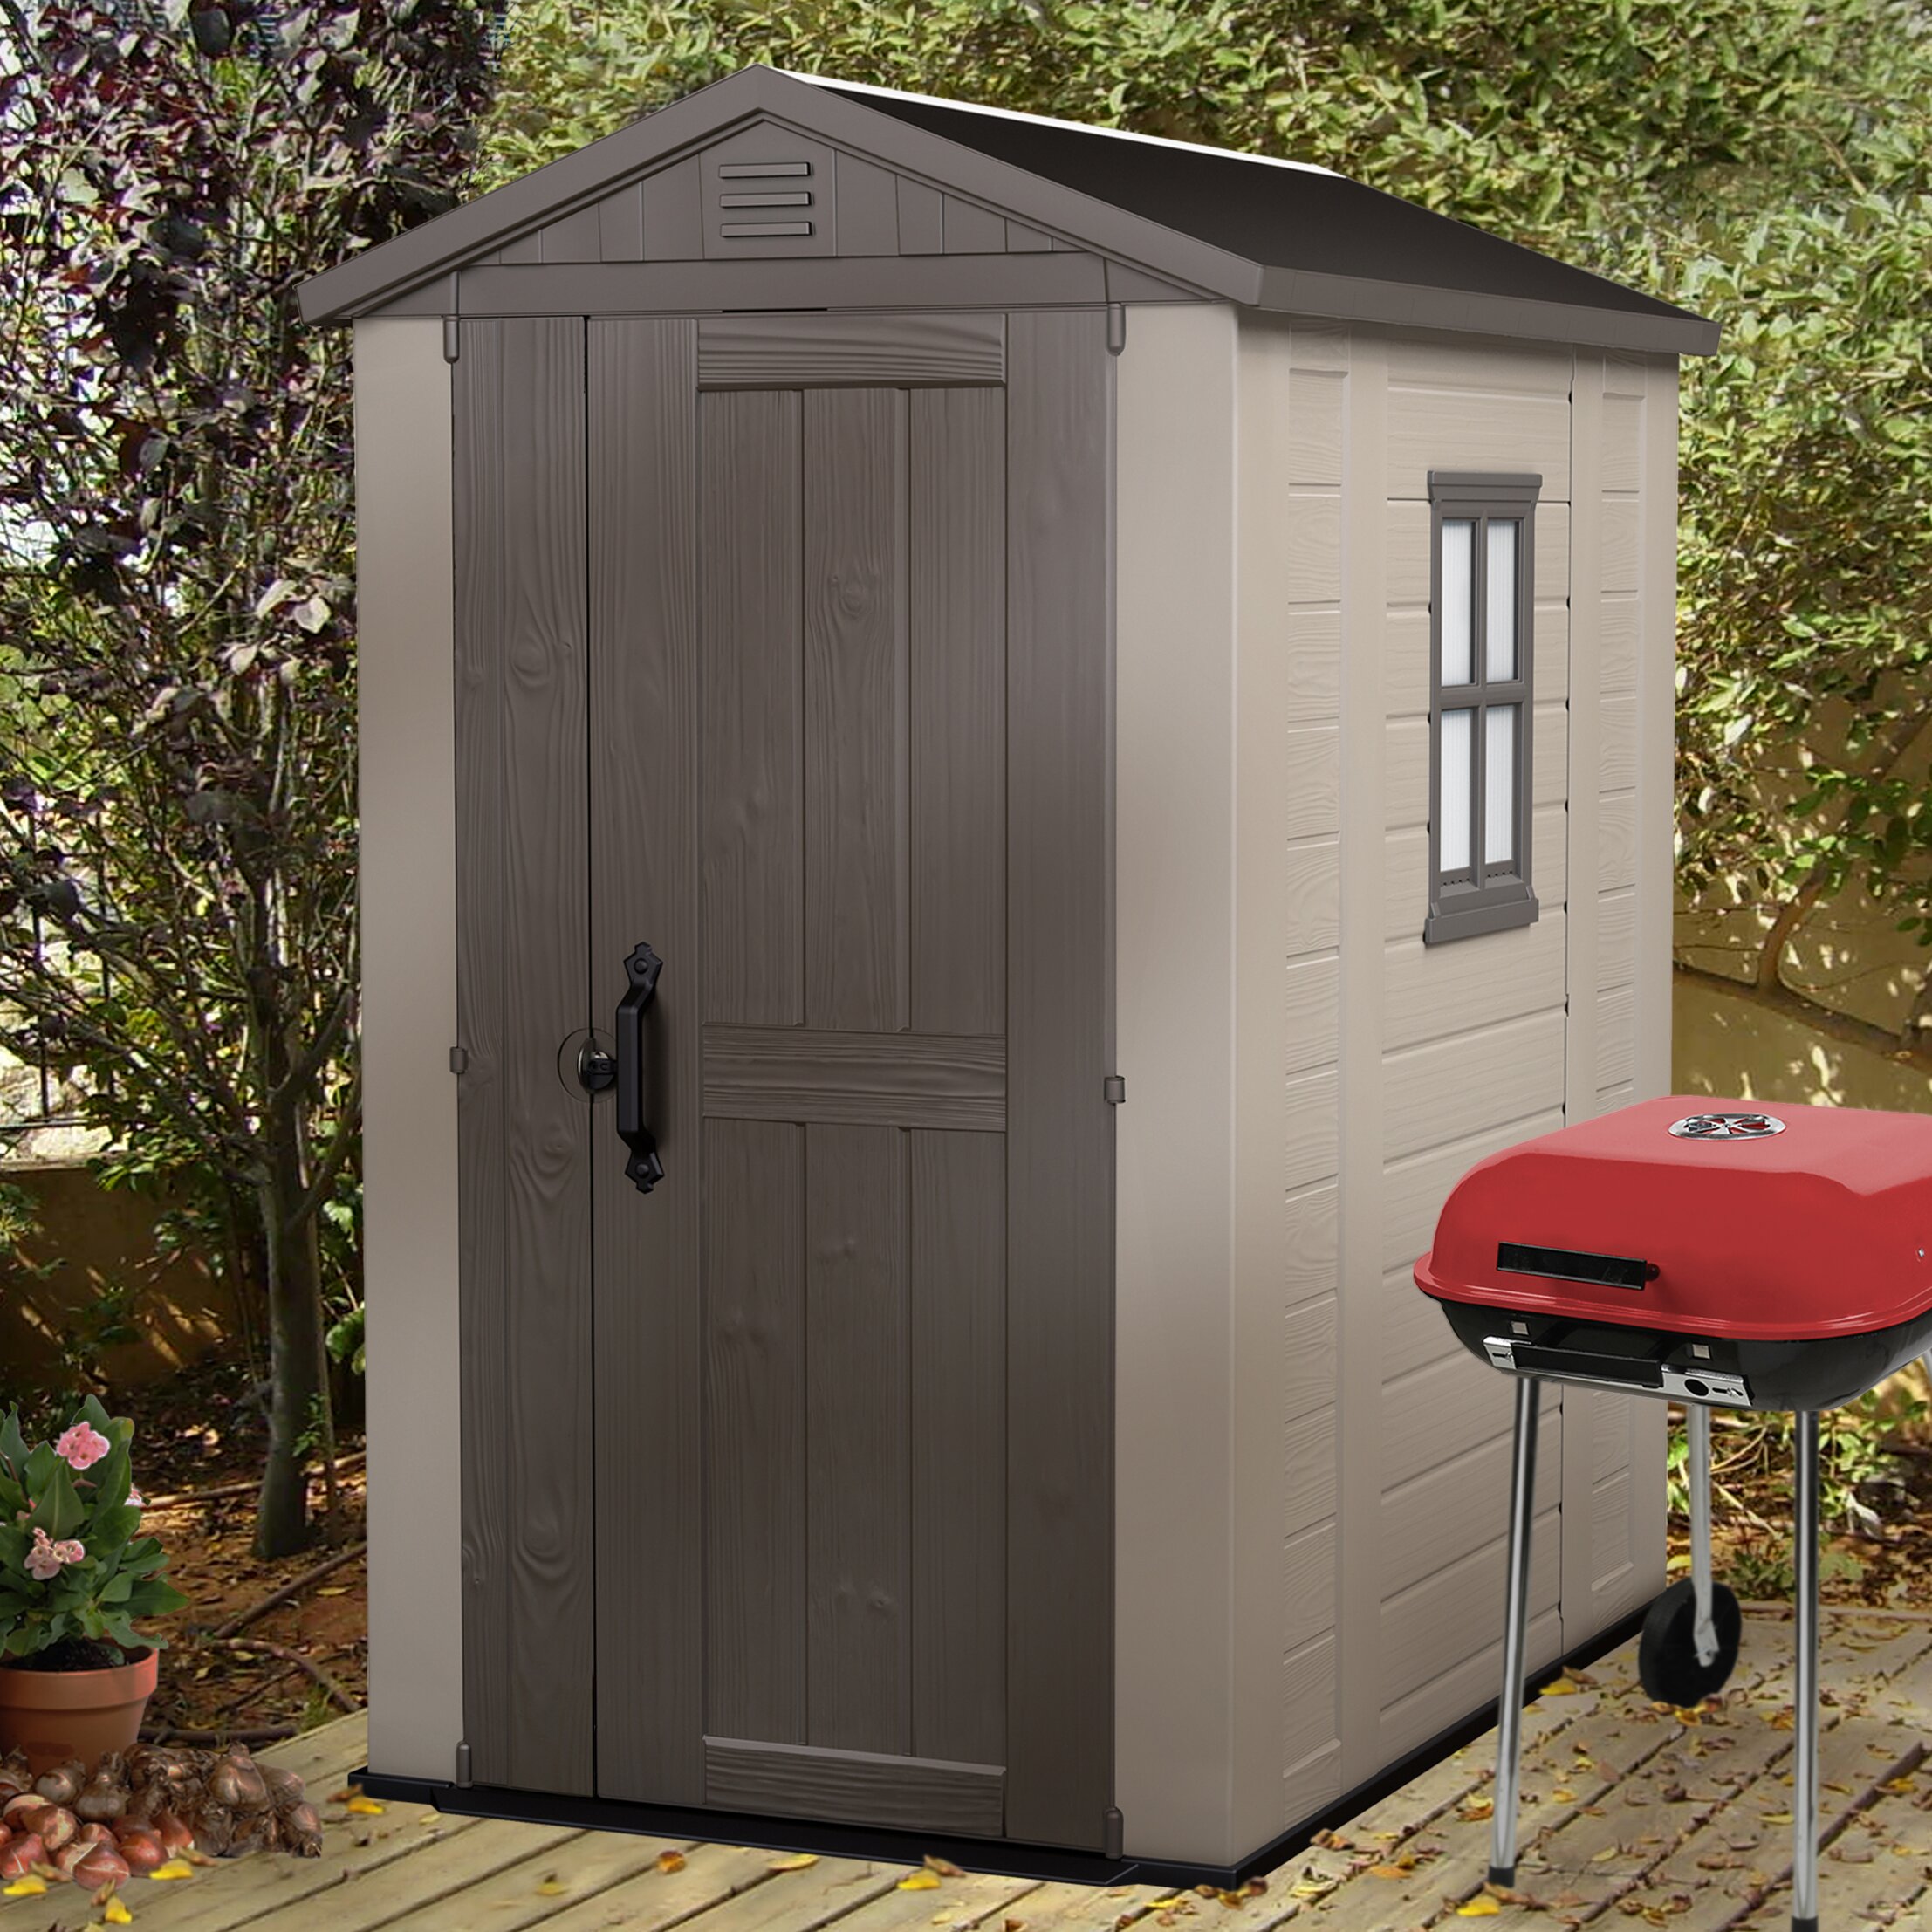 Keter Factor 6 Ft. W x 4 Ft. D Resin Storage Shed 